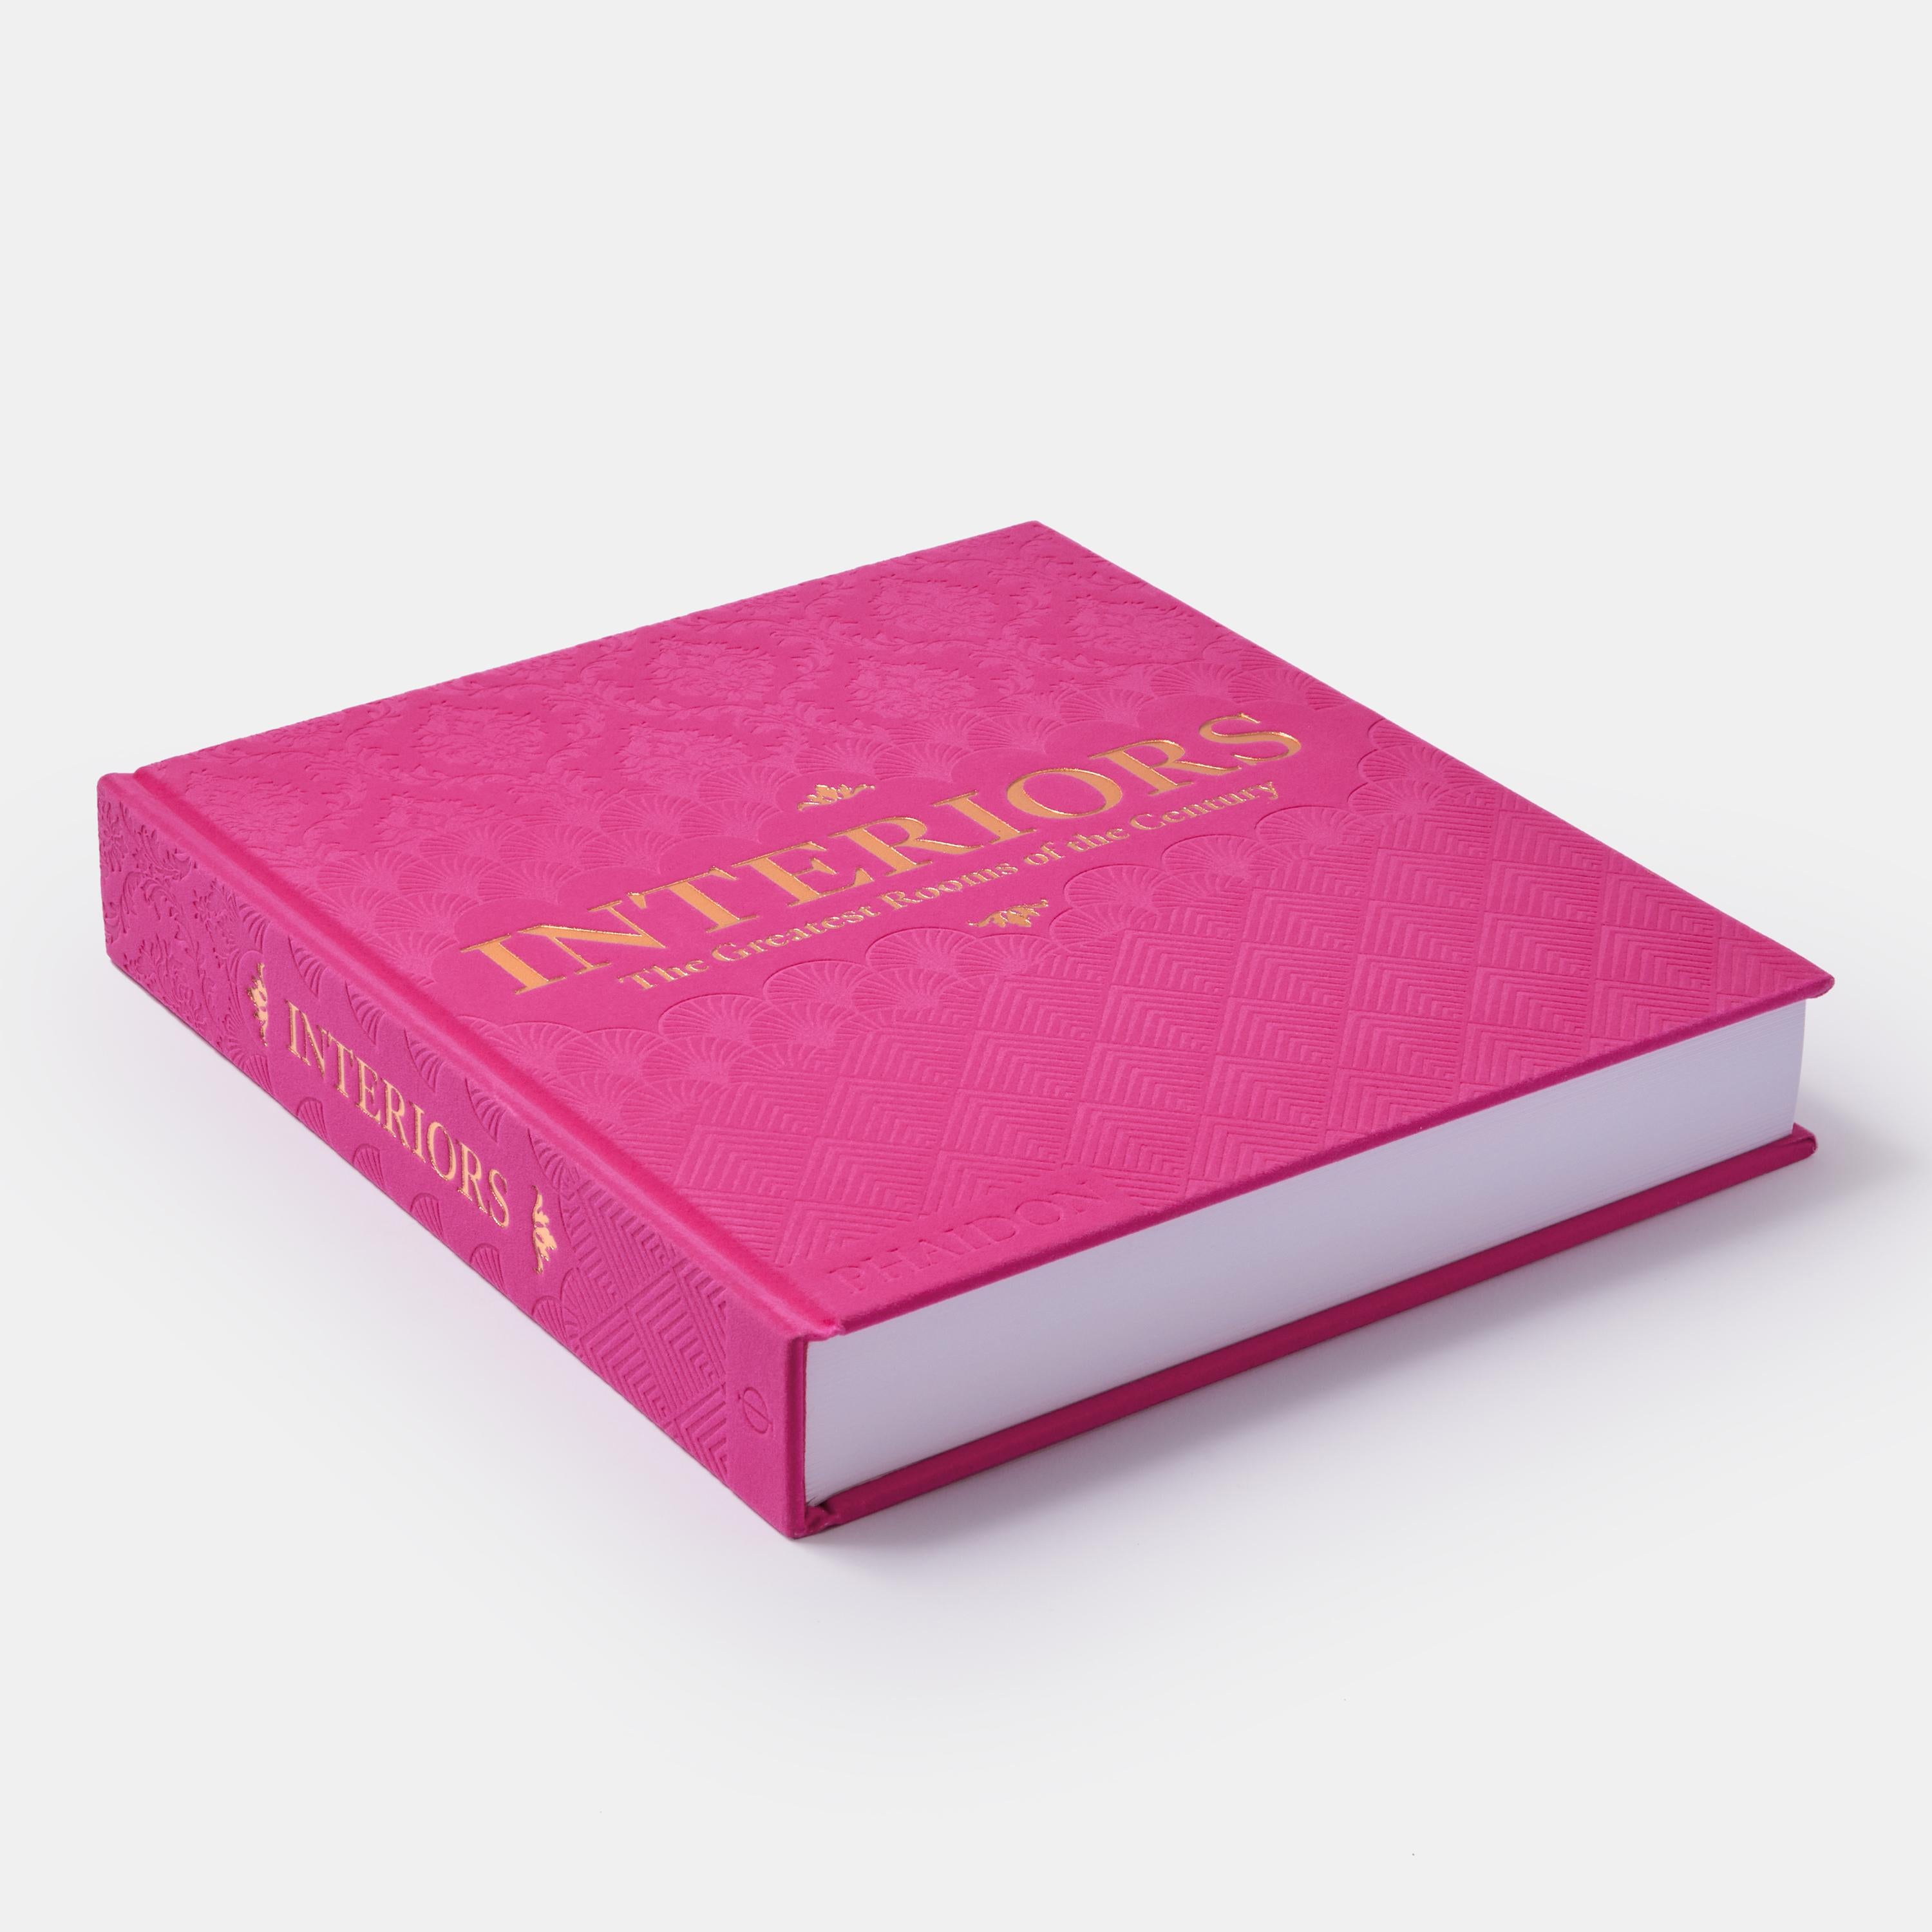 Contemporary Interiors The Greatest Rooms of the Century (Pink Edition)